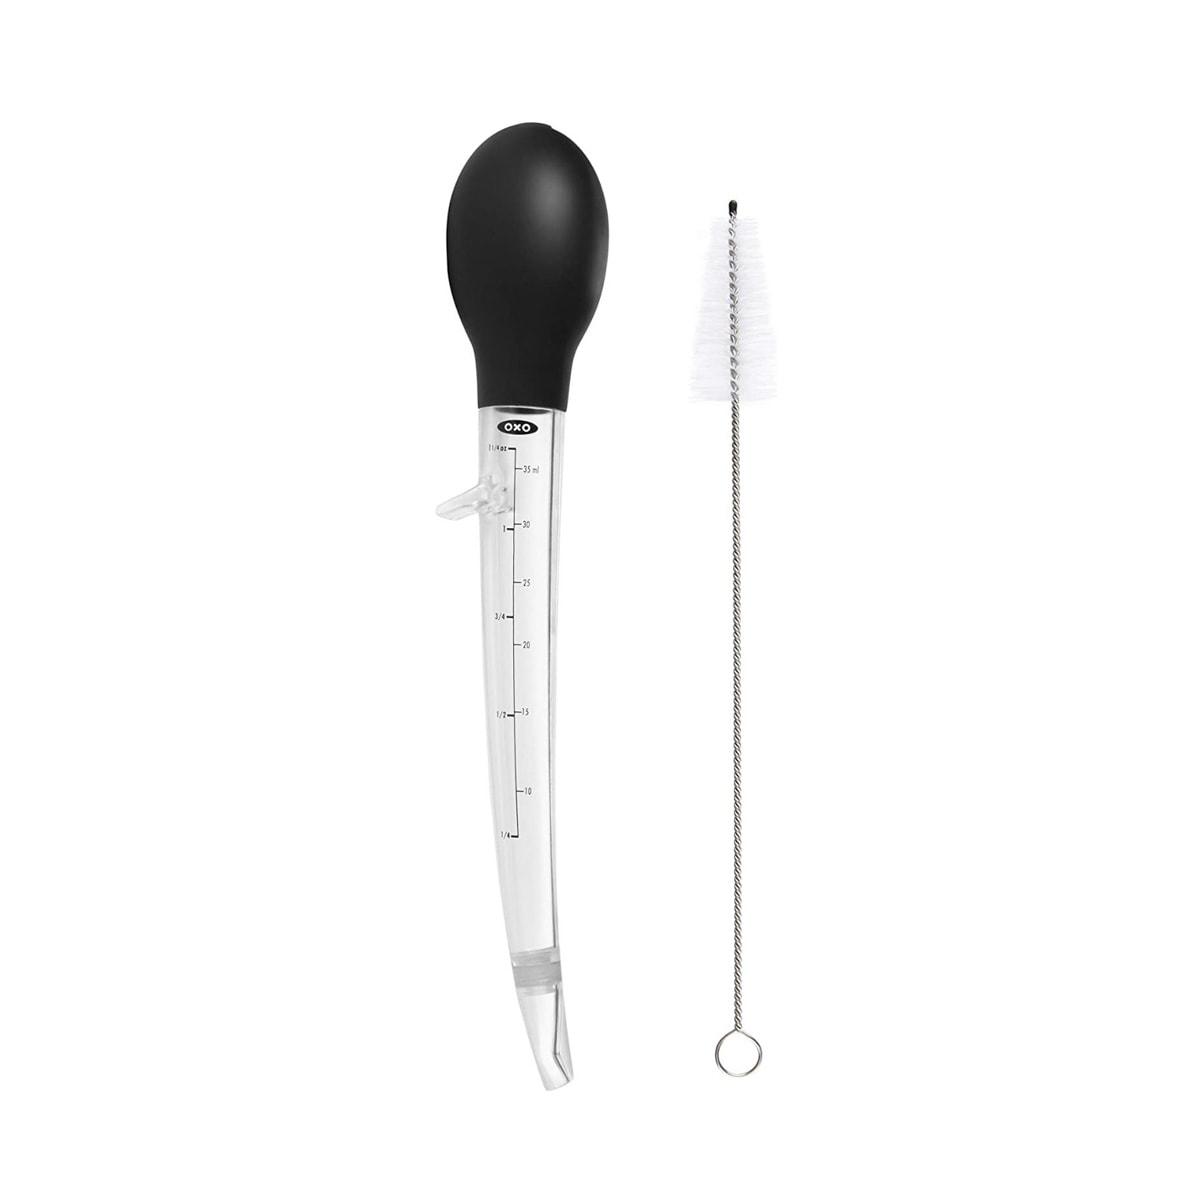 Turkey baster and cleaning brush.